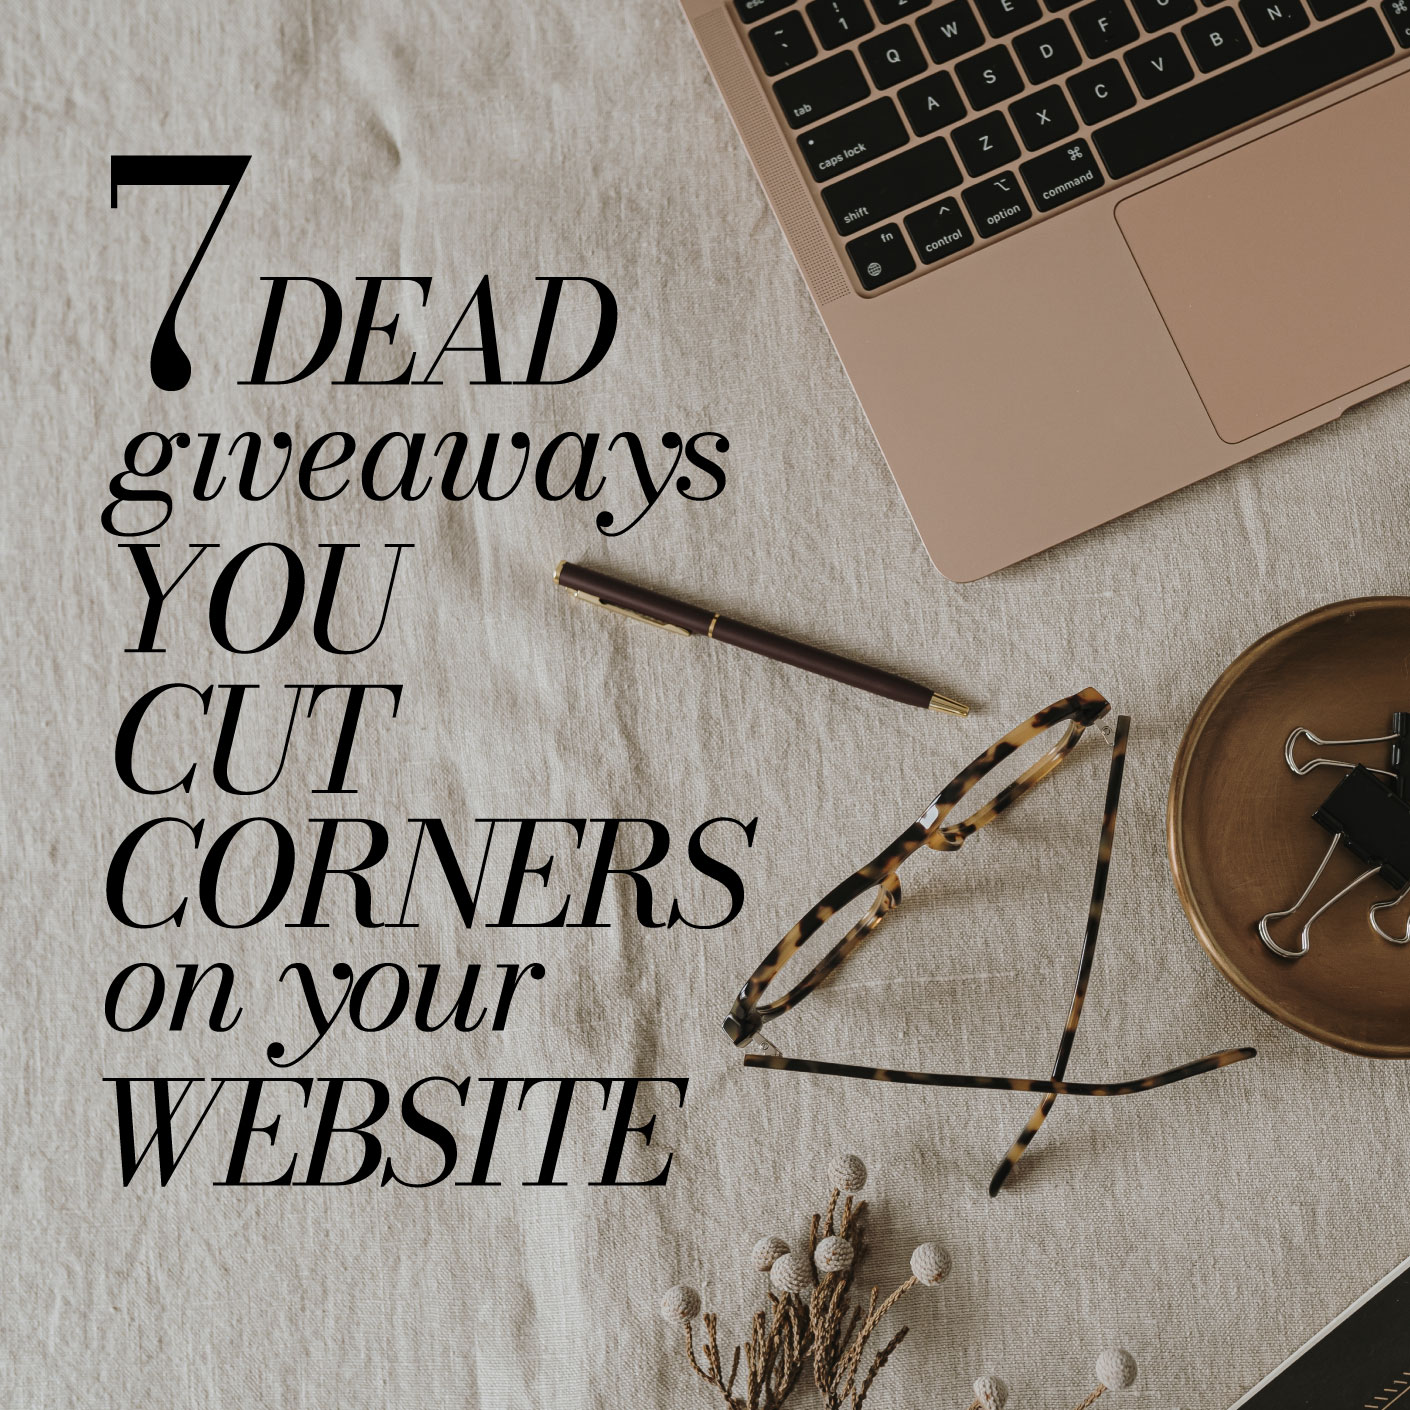 7 Giveaways That You Cut Corners on Your Website